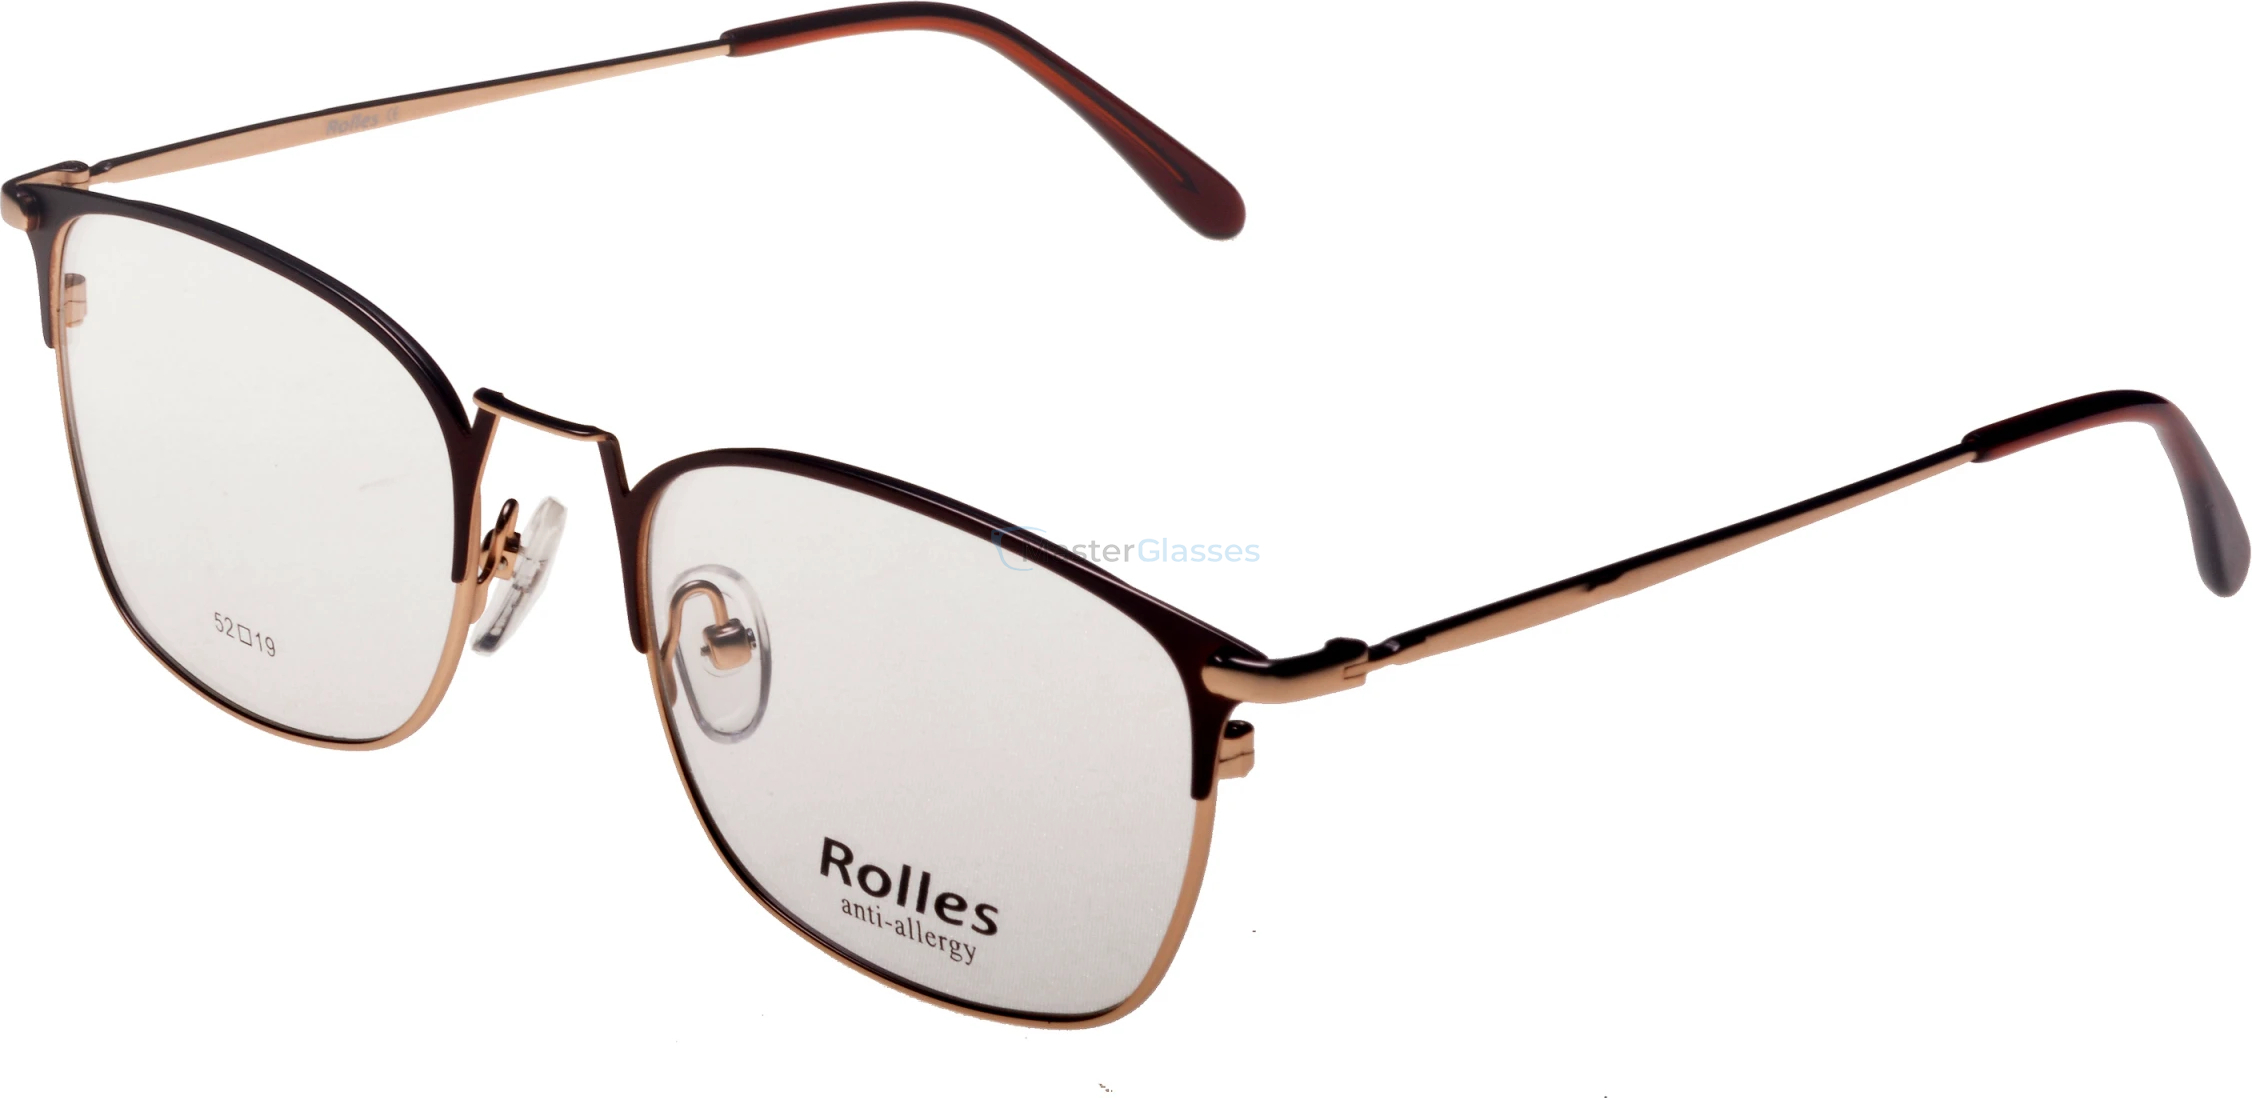  Rolles 668 02